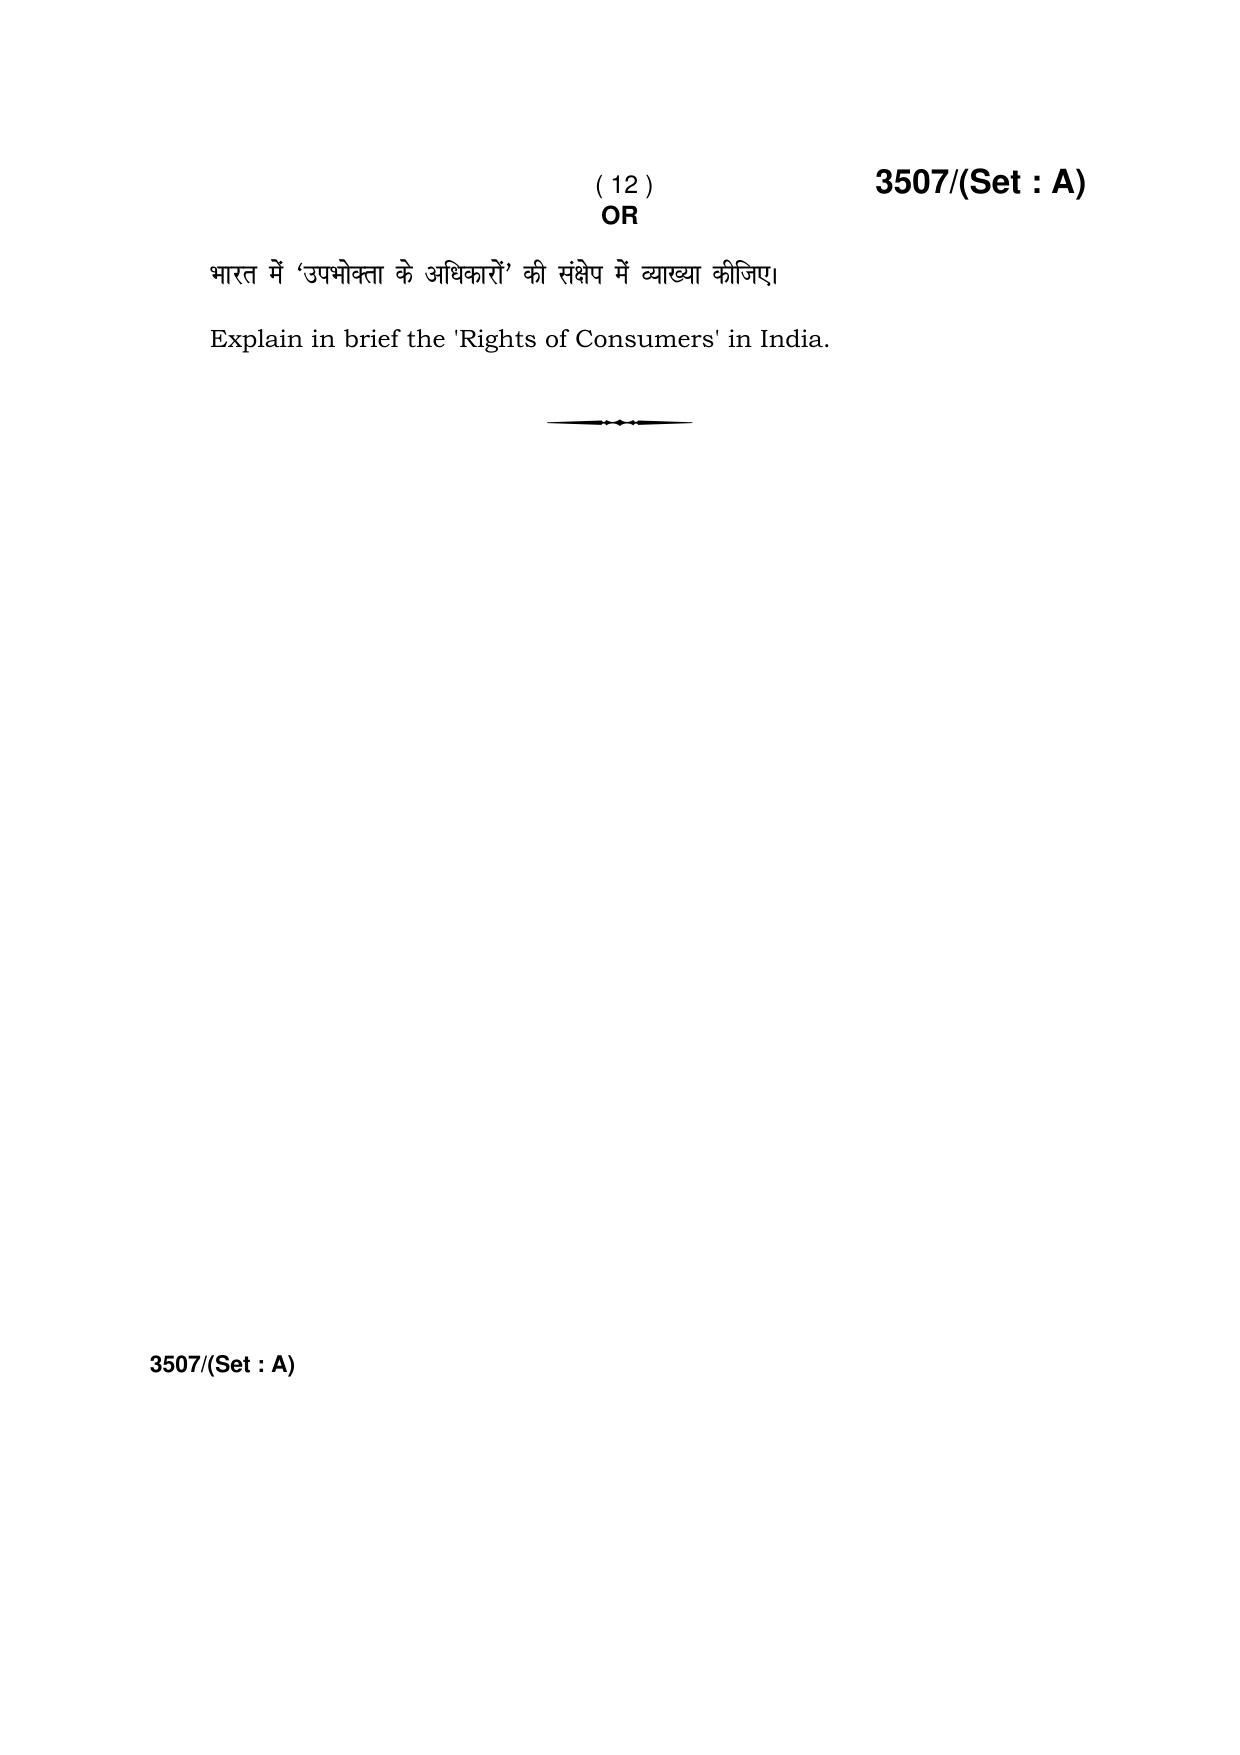 Haryana Board HBSE Class 10 Social Science -A 2018 Question Paper - Page 12